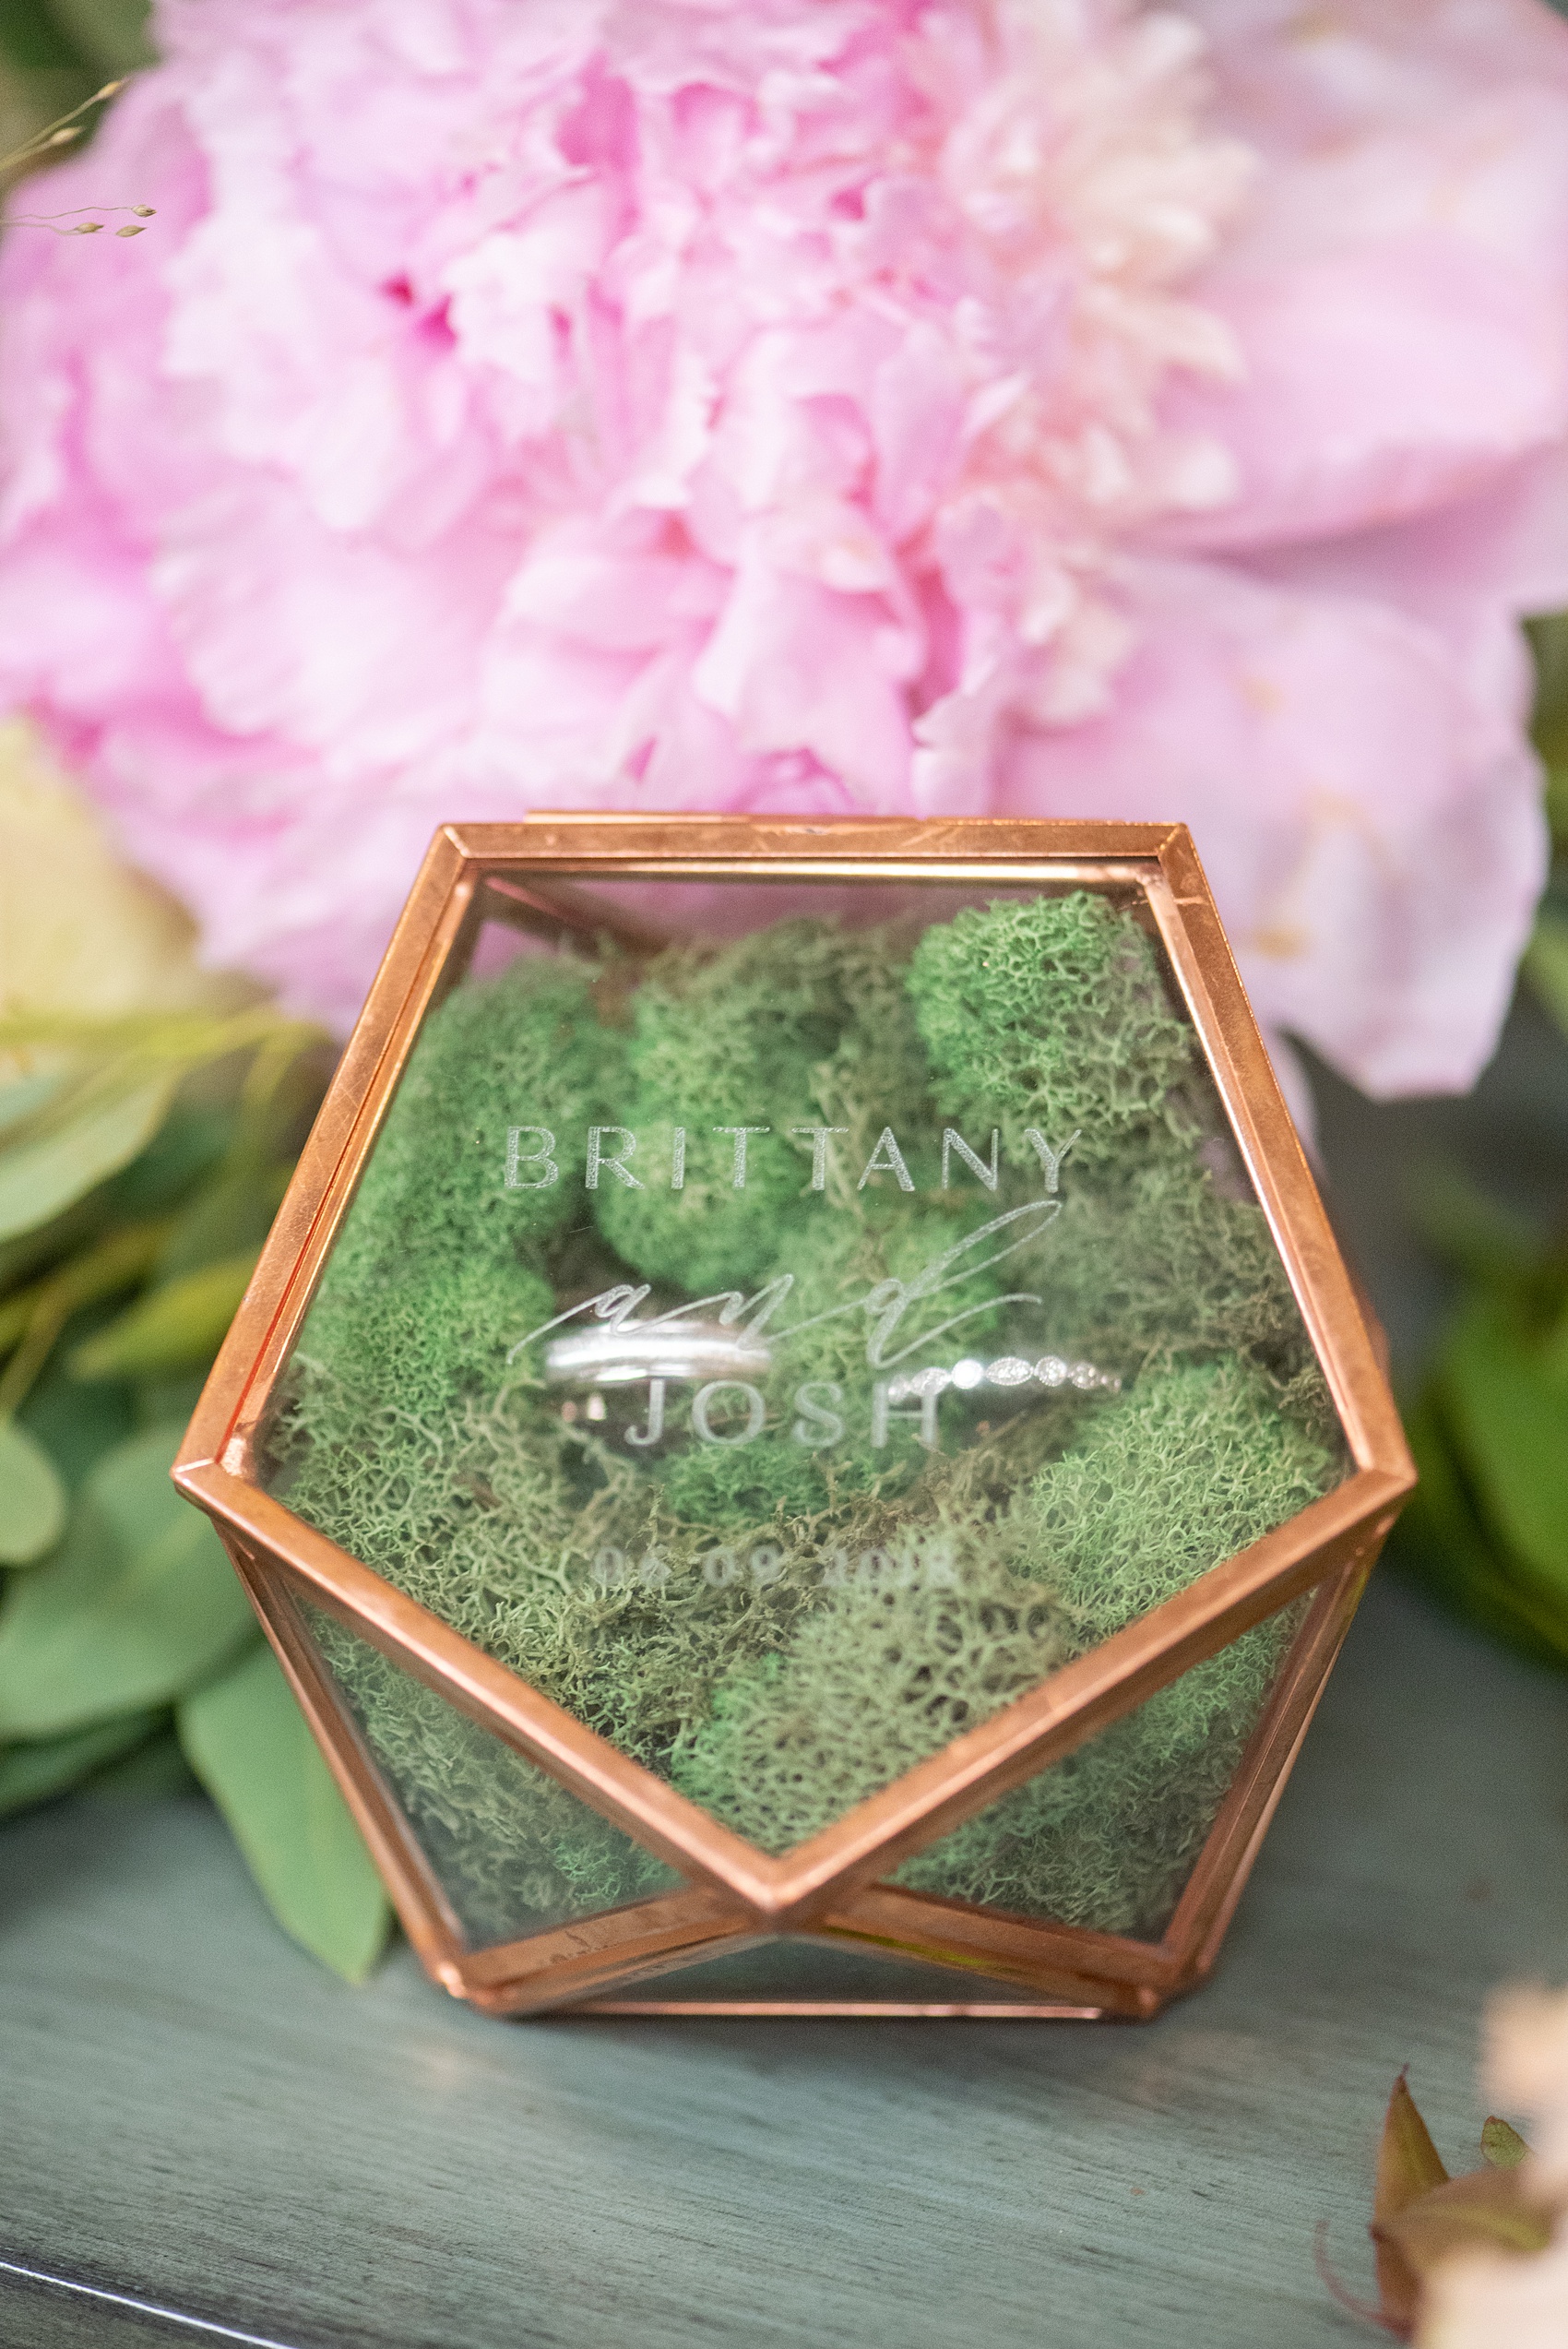 A summer wedding at Olde Mill Inn, NJ. Photos by Mikkel Paige Photography for an event with light pink and blue details. This New Jersey venue is a great option for something not too far from NYC. The bride wanted a Midsummer Night’s Dream theme and carried that out with garden details, like this glass ring box engraved with their names, filled with green moss and their bands. Click through for their complete wedding recap! #OldeMillInn #NJwedding #NJweddingphotographer #mikkelpaige #NewJerseyWeddingVenue #NewJerseyWedding #CrossEstateGardens #weddingdetails #ringbox #midsummernightsdream